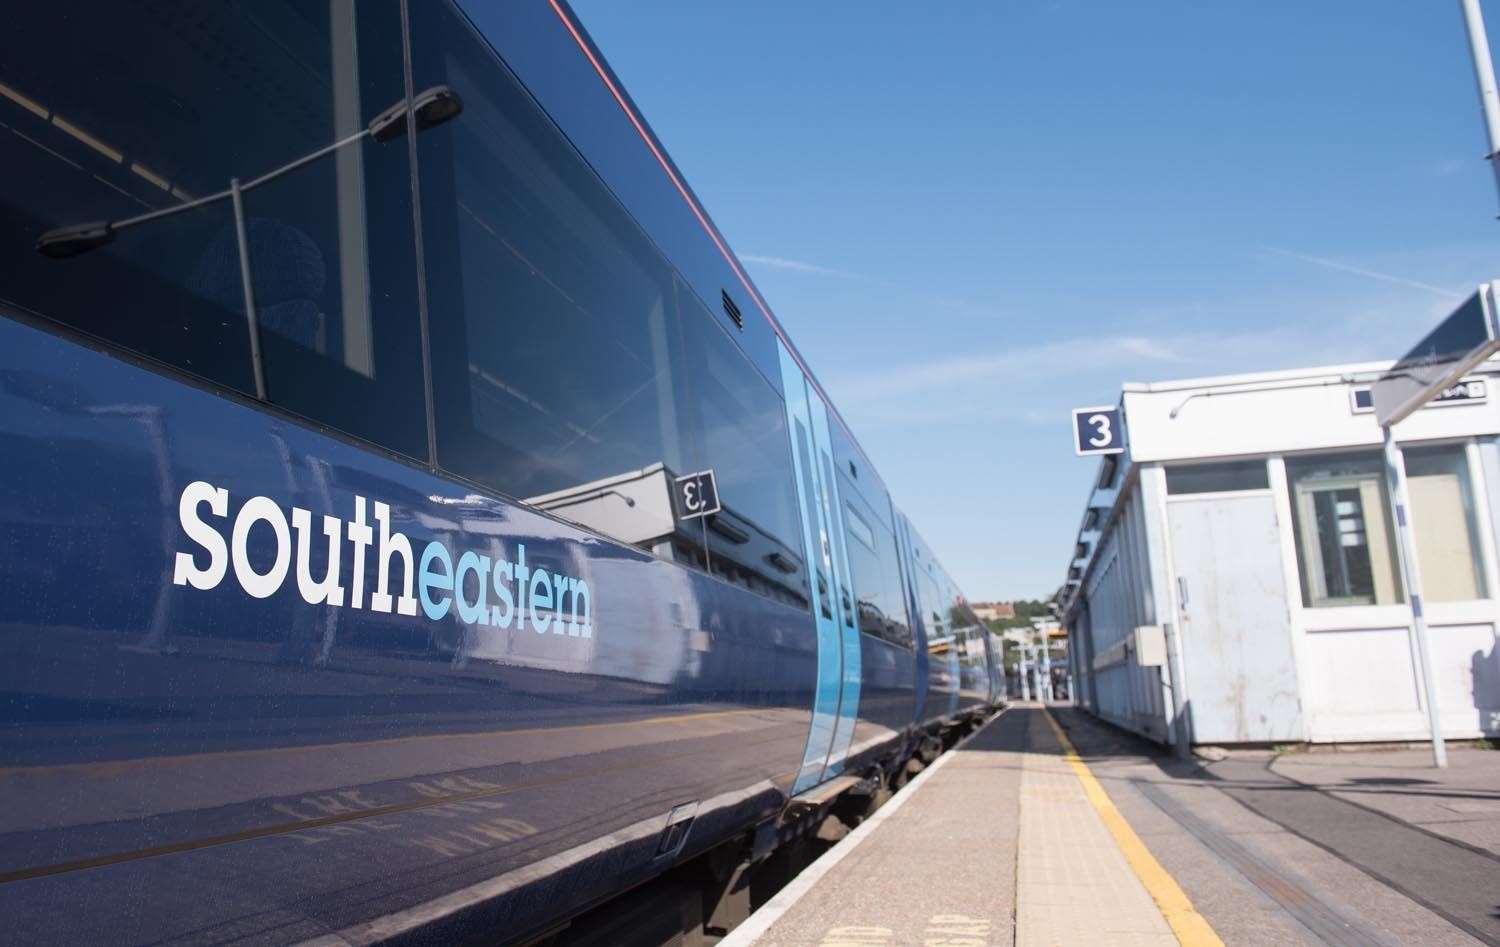 Southeastern services have been suspended or delayed from Dartford due to emergency engineering works needed at Sidcup